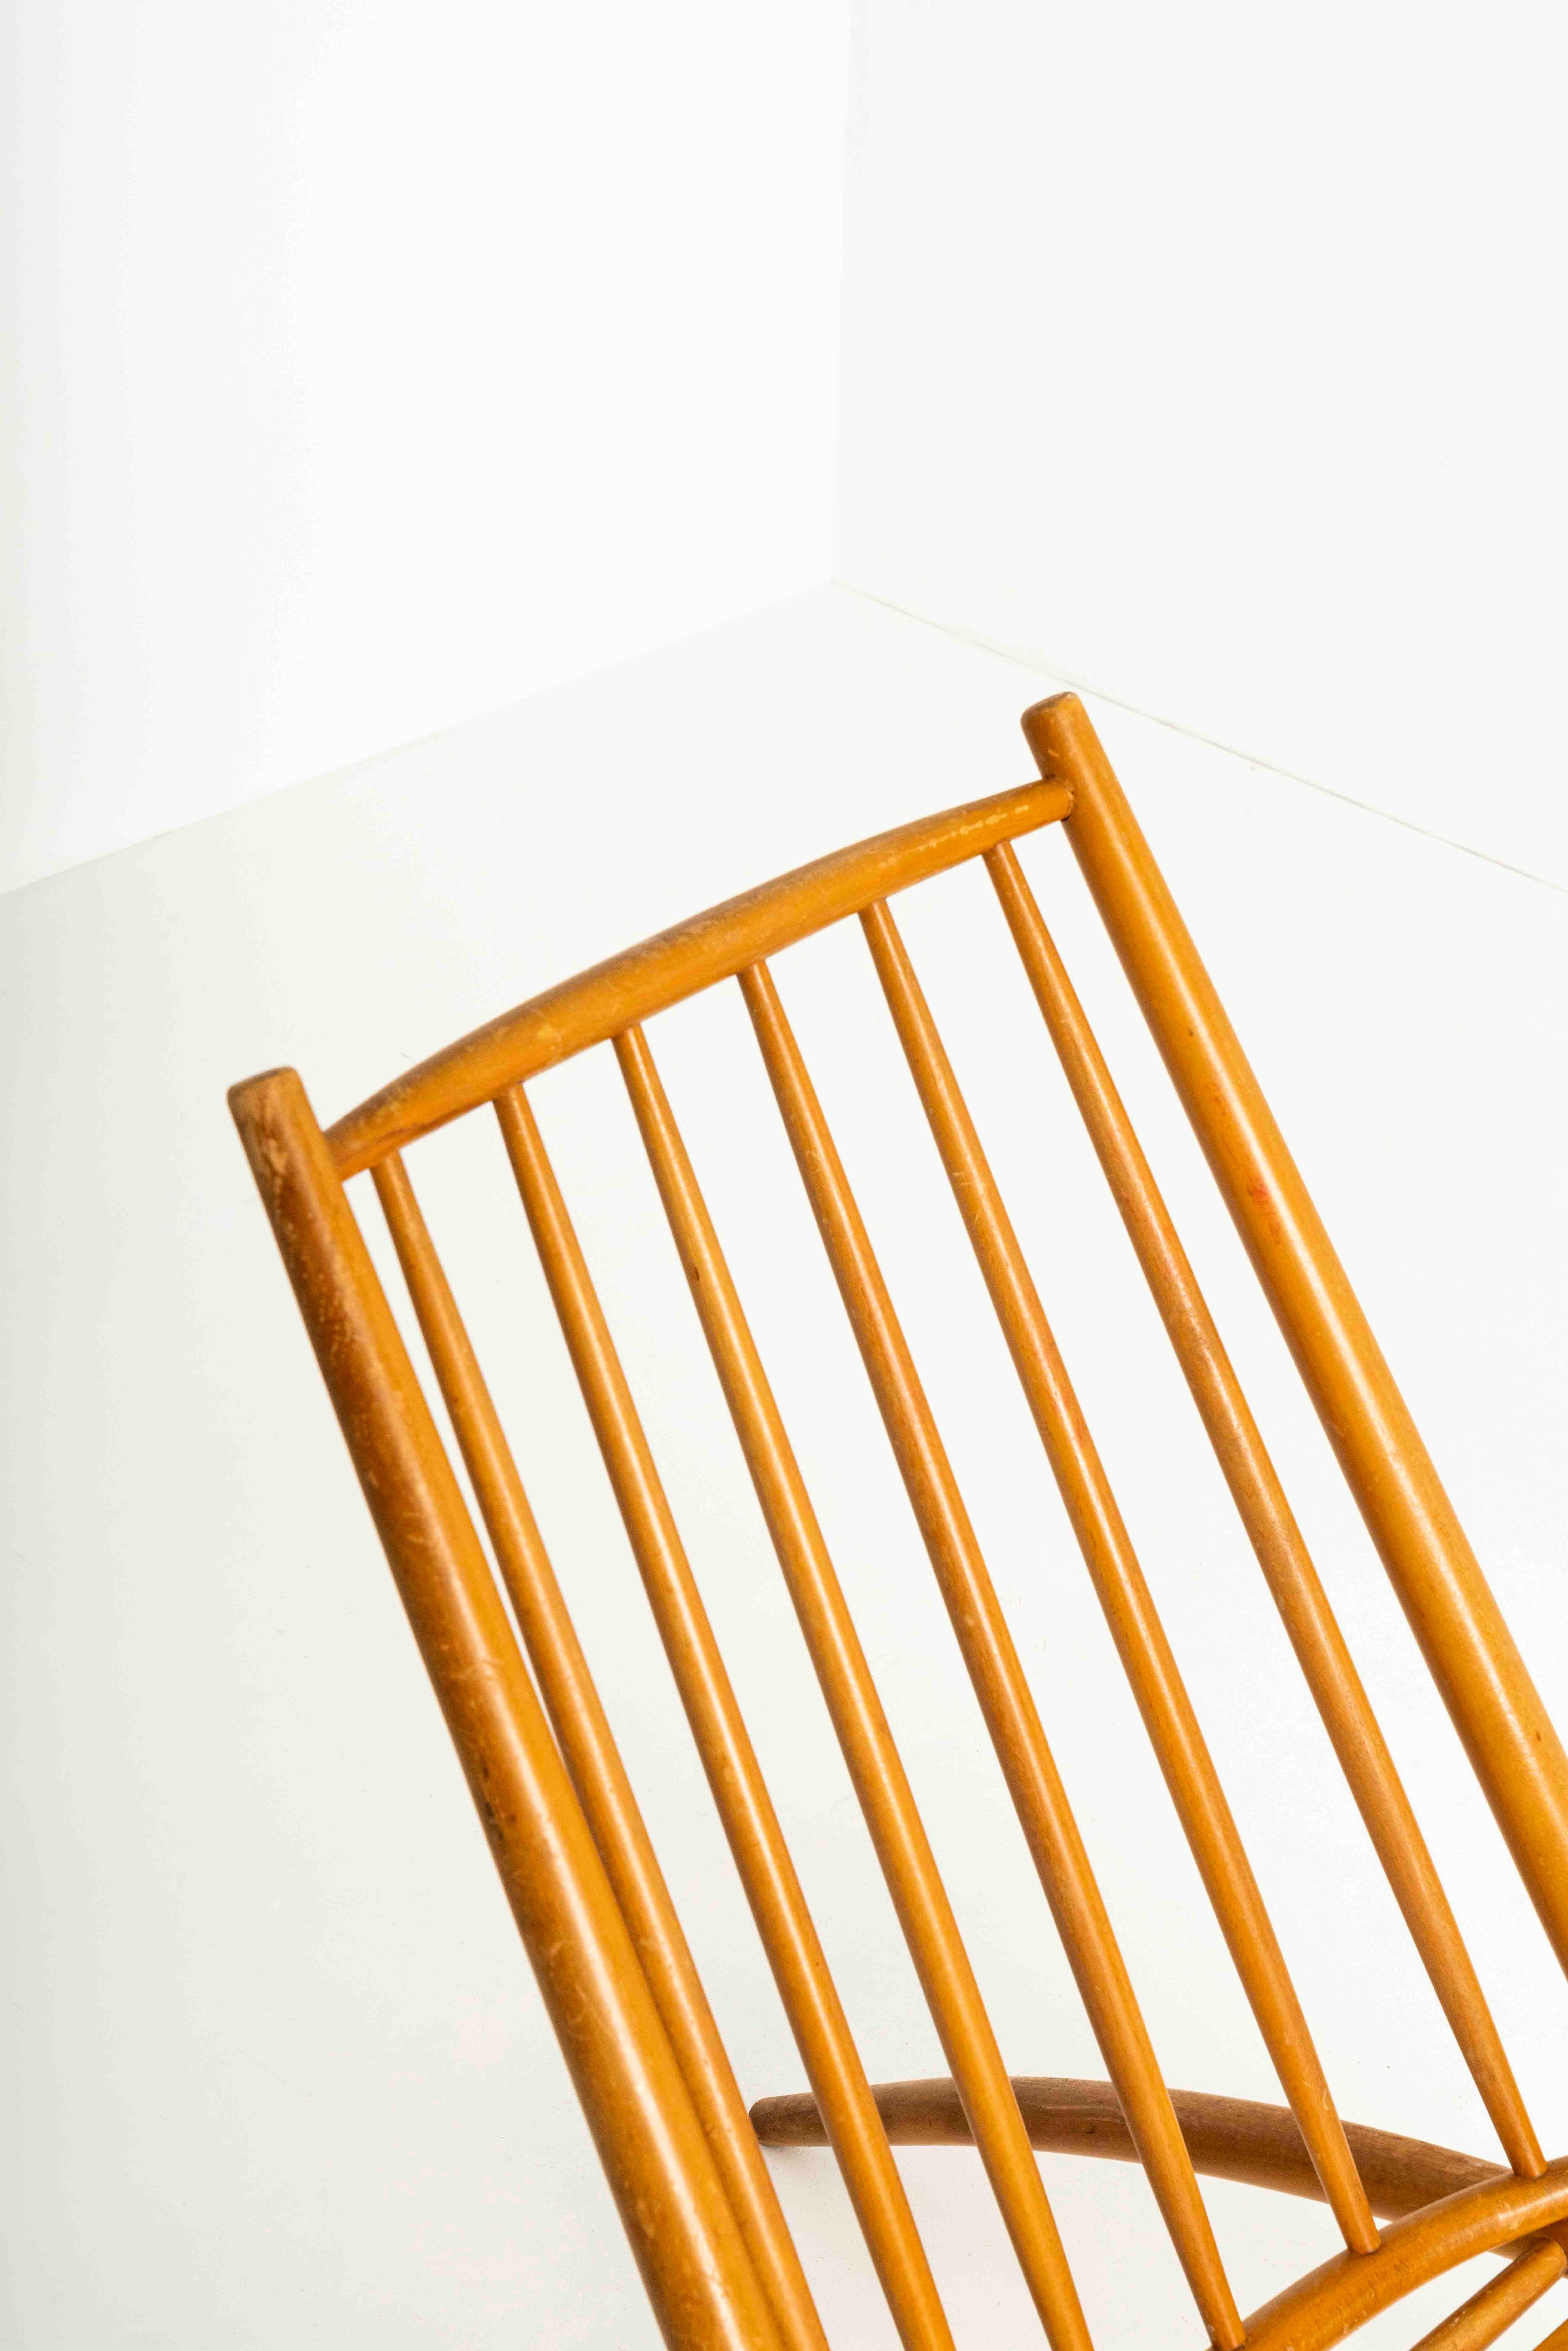 Mid-20th Century Congo Chair in Birch by Ilmari Tapiovaara for Asko, Finland, 1960s For Sale